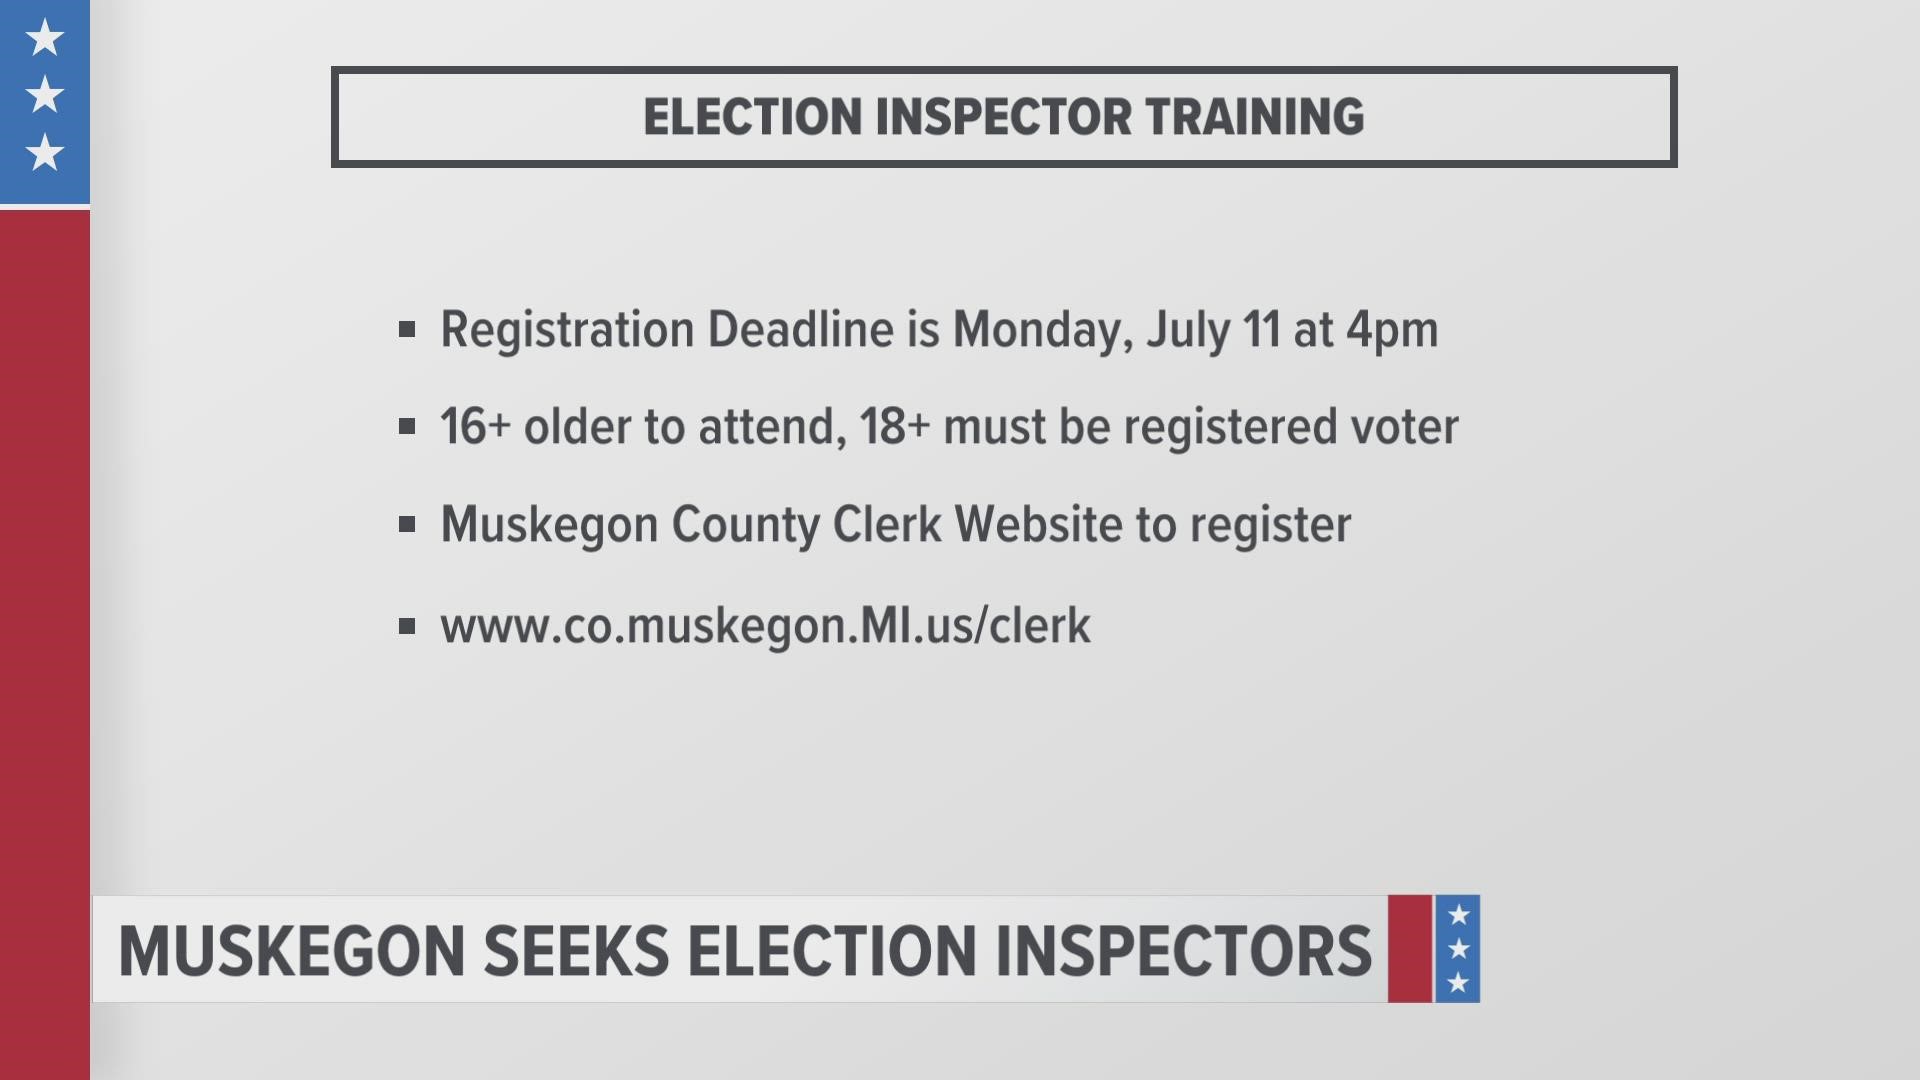 On Thursday, July 14th, the county is hosting a free training for election inspector certification.